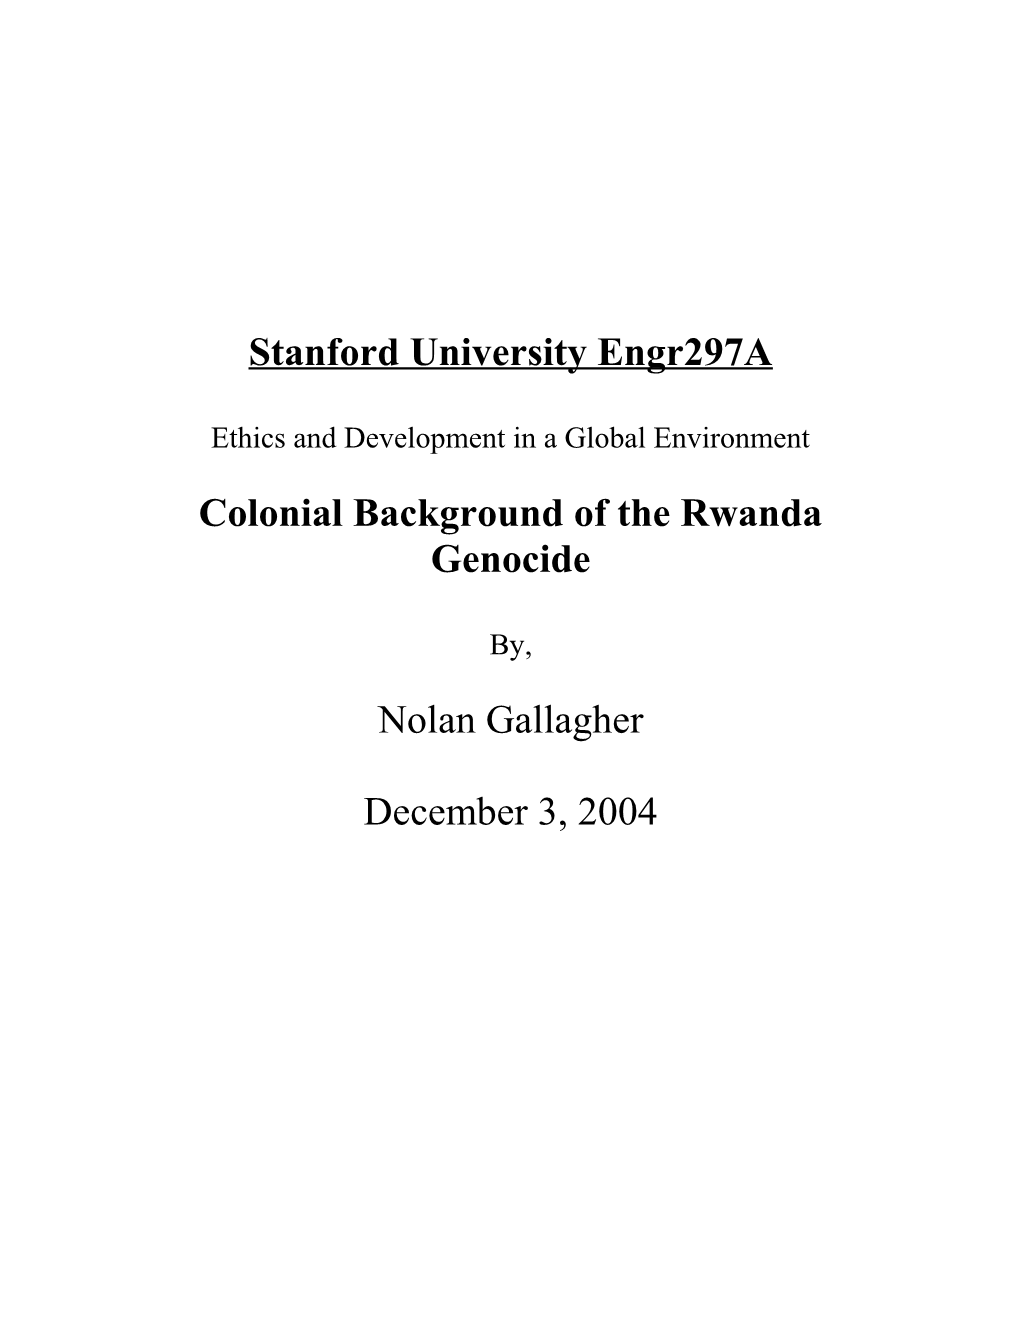 Stanford University Engr297a Ethics and Development in a Global Environment Colonial Background